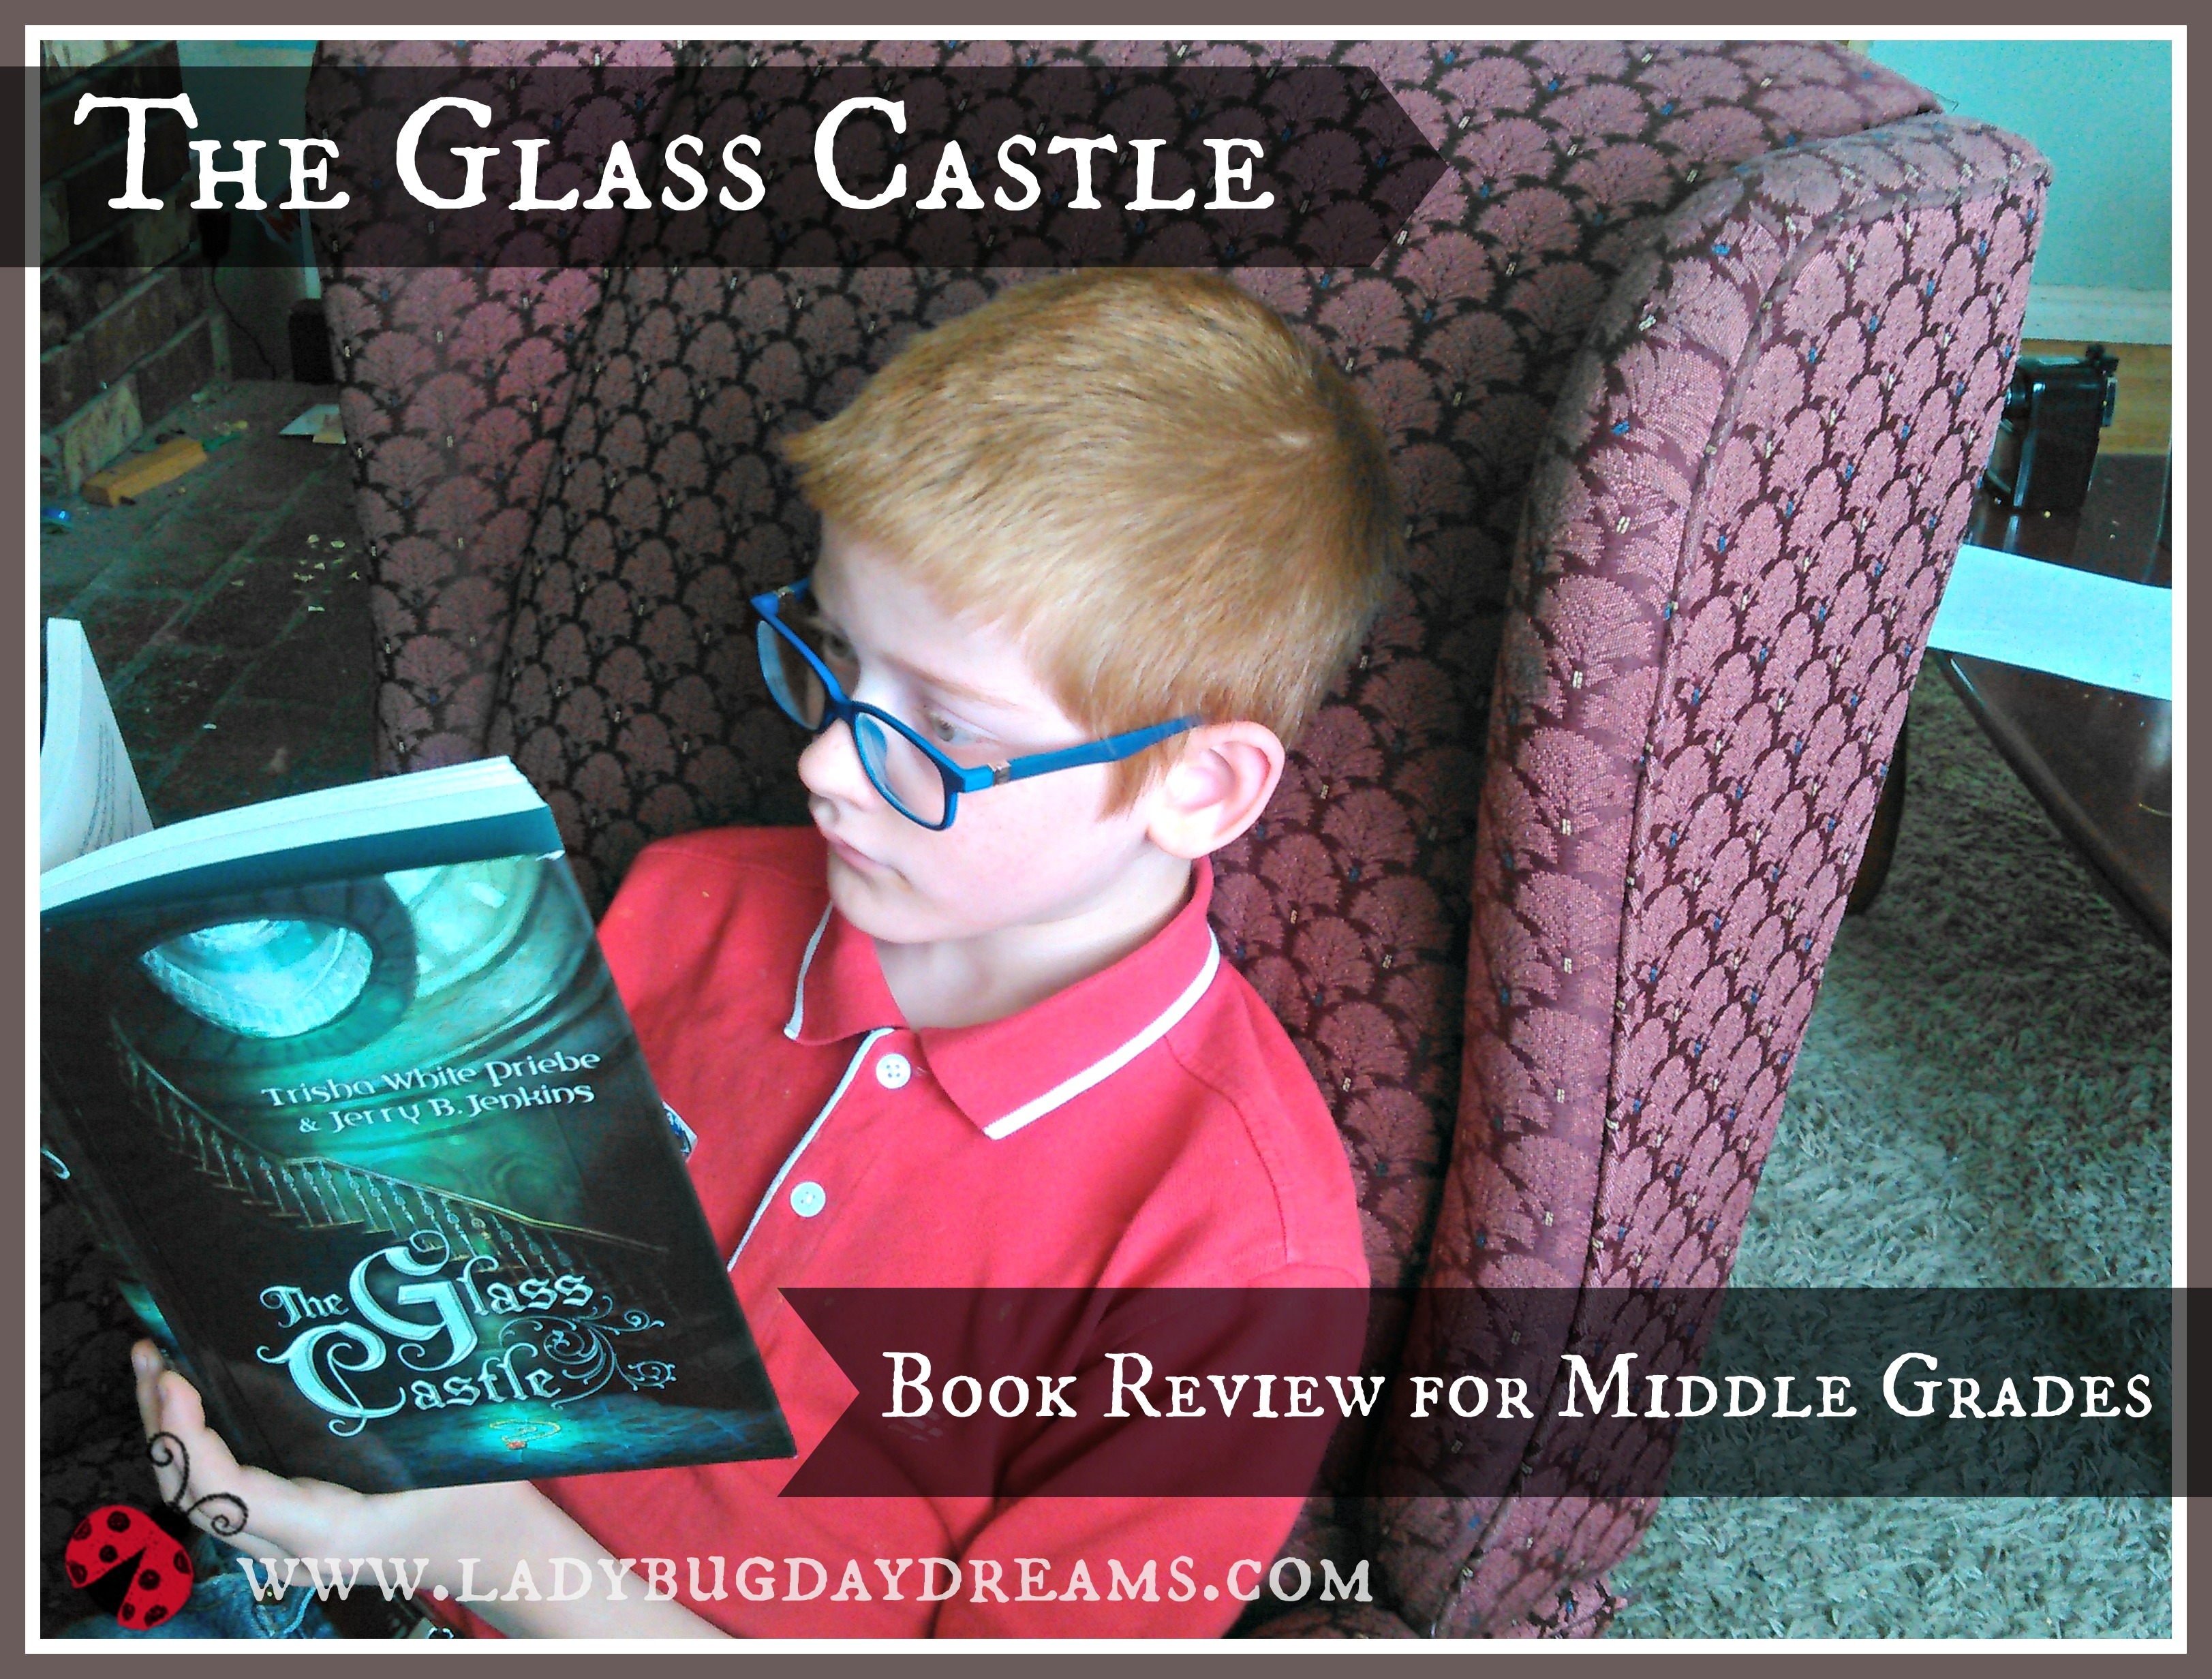 The Glass Castle review